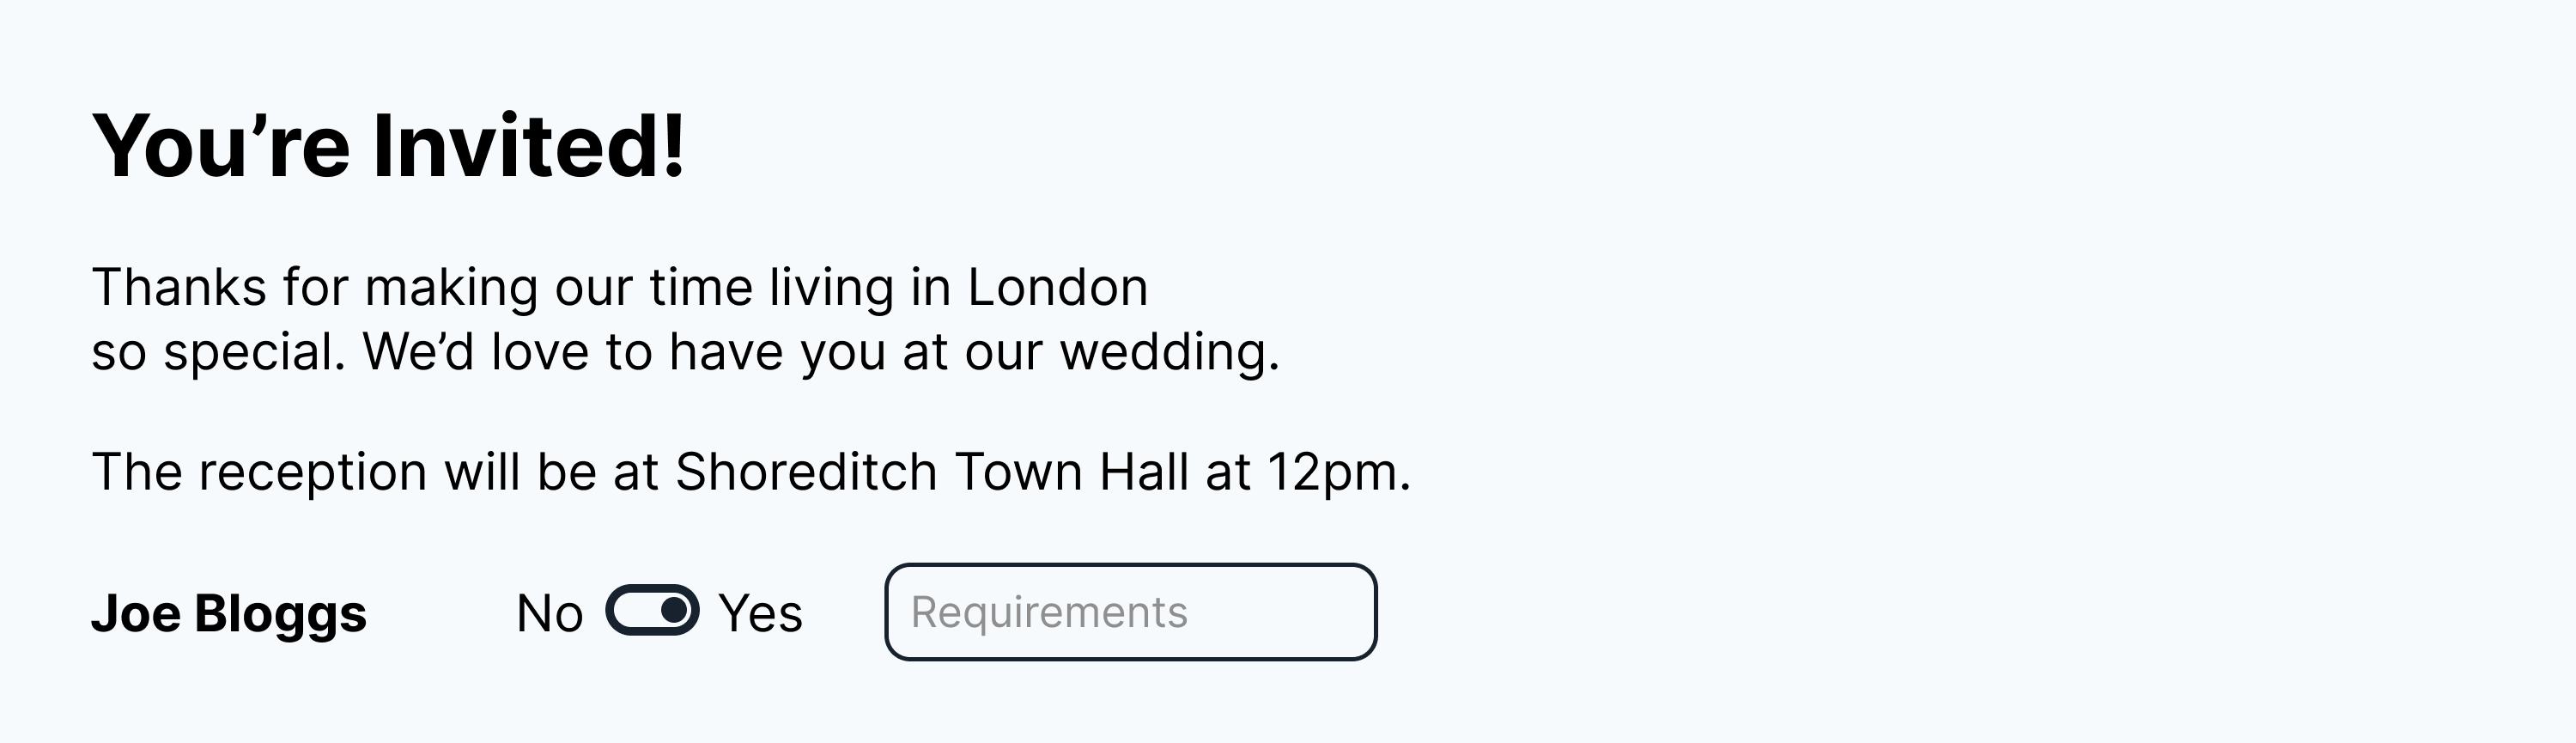 A mockup showing a basic invite with one guest, no ceremony or +1 information or form